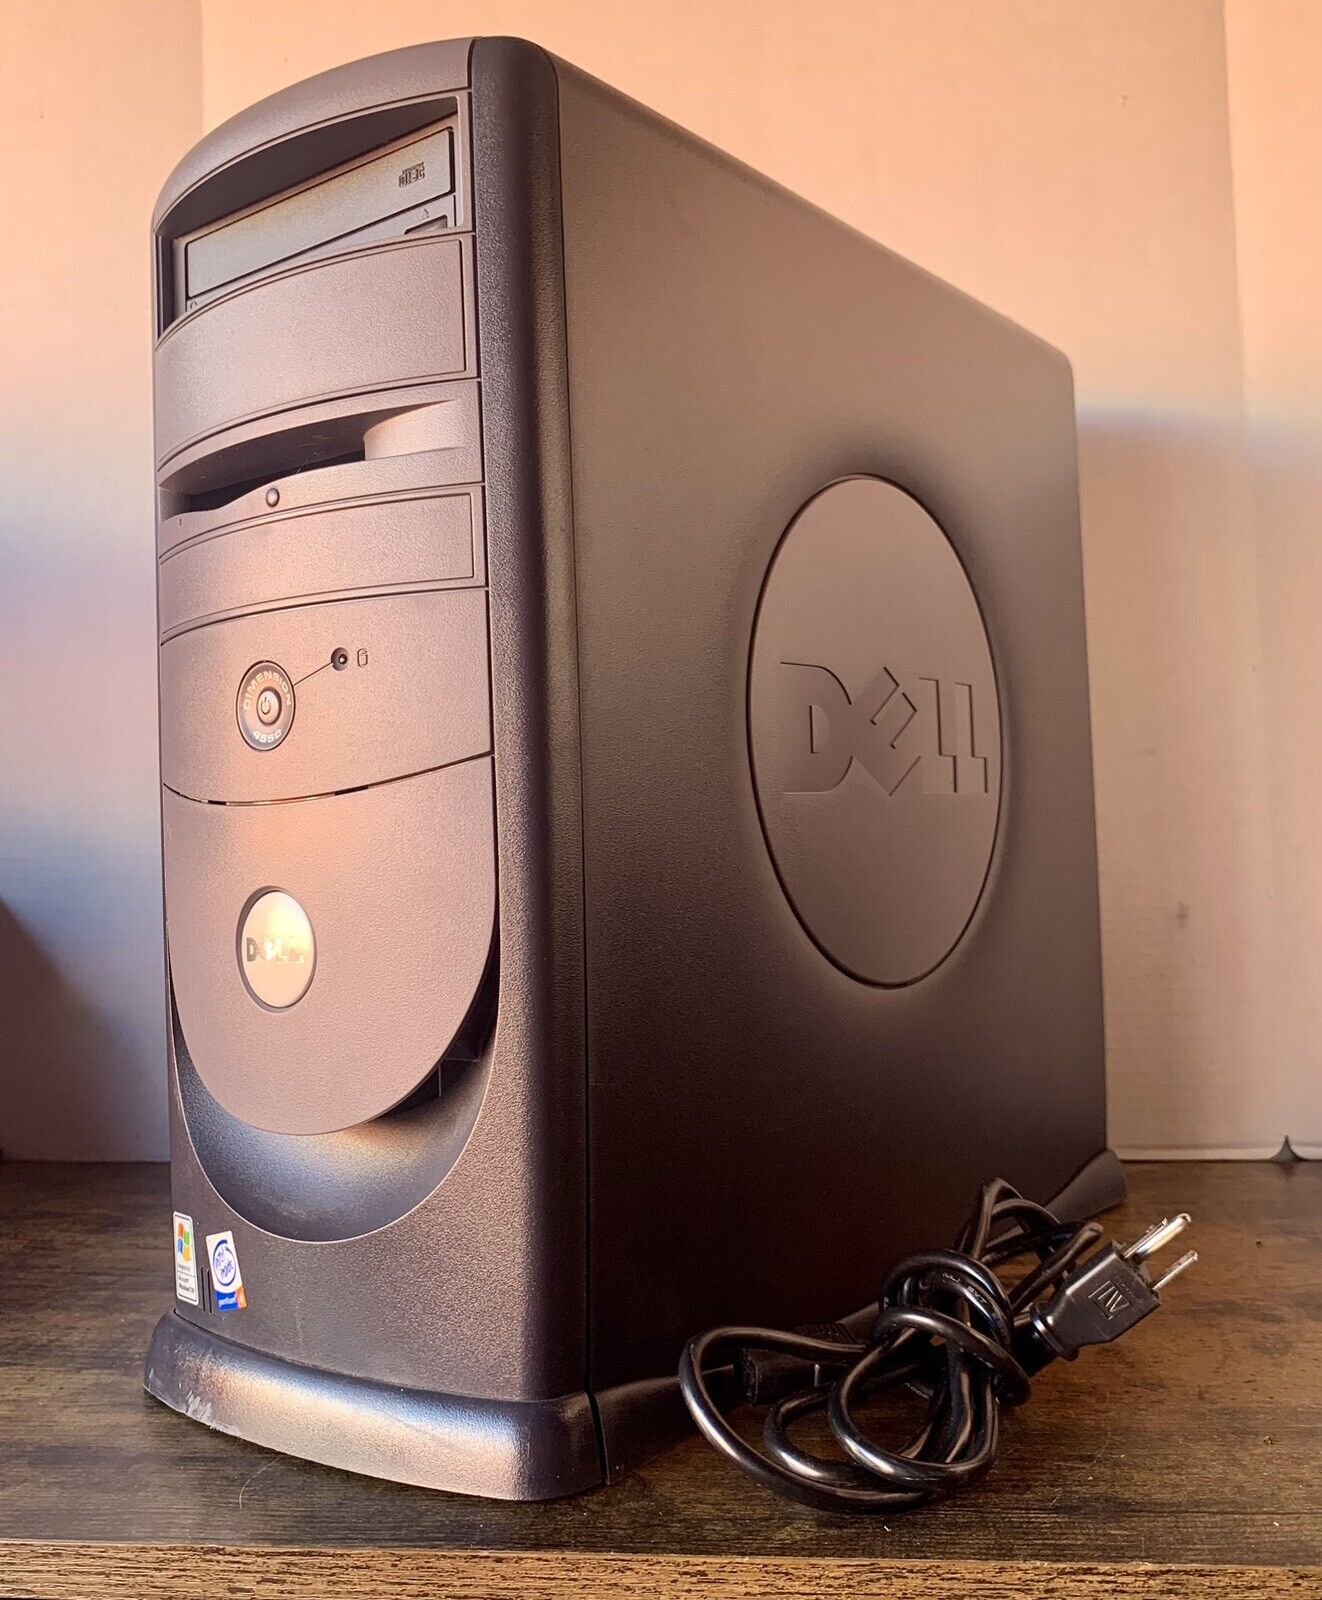 Dell Dimension 4550 DHM Intel Pentium 2.4GHz No Hard Drive - Works - See Notes